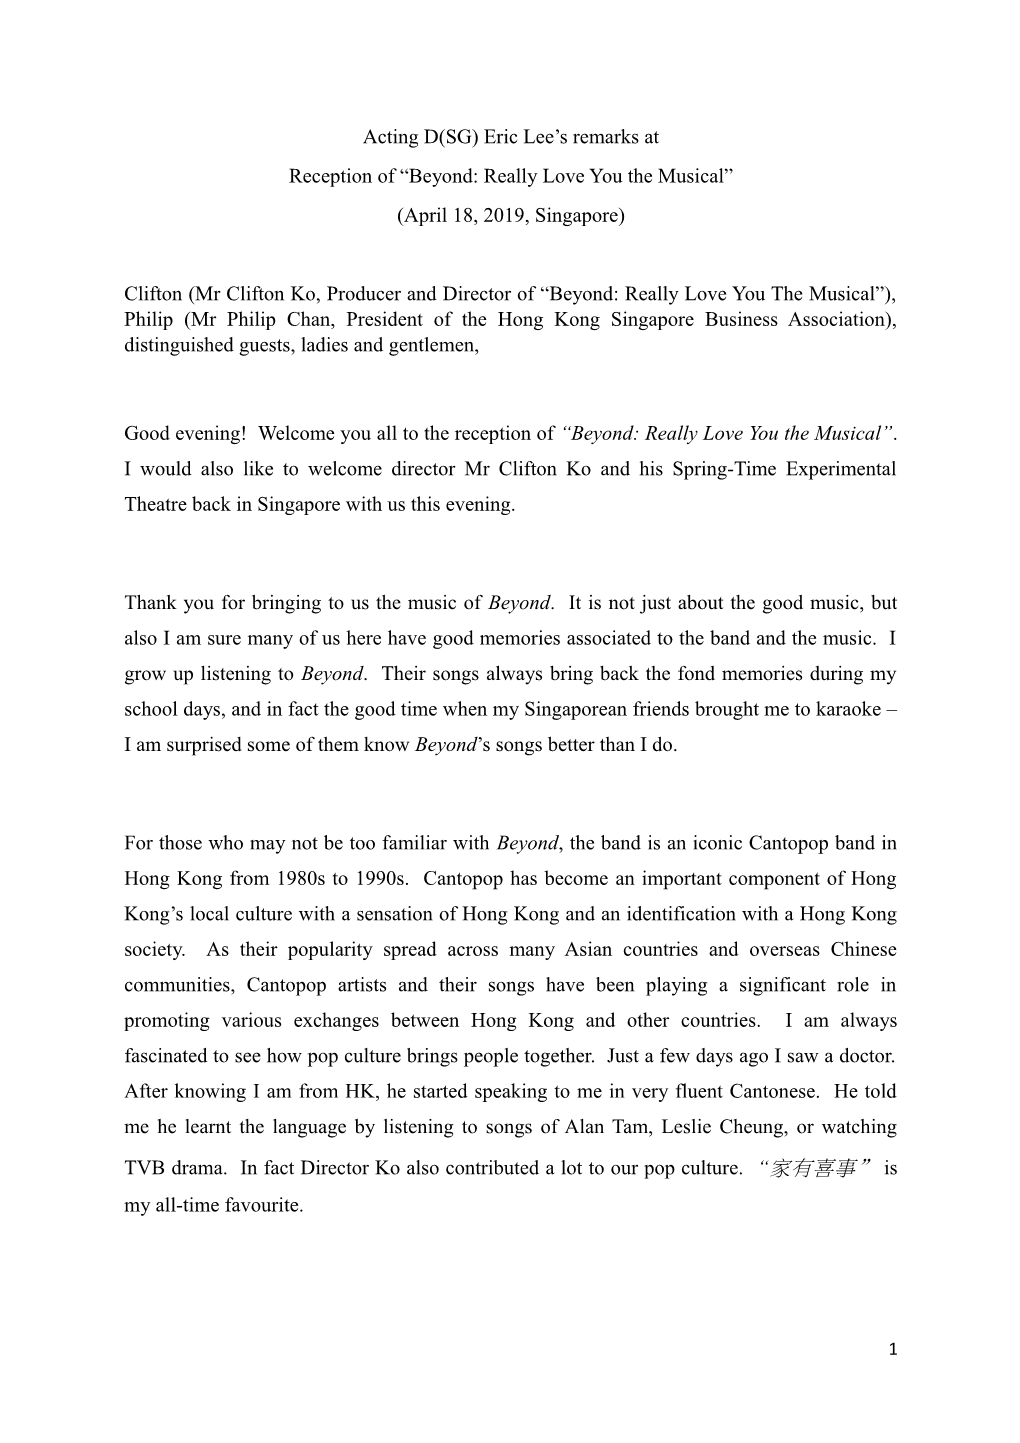 Acting D(SG) Eric Lee's Remarks at Reception of “Beyond: Really Love You the Musical” (April 18, 2019, Singapore) Clifton